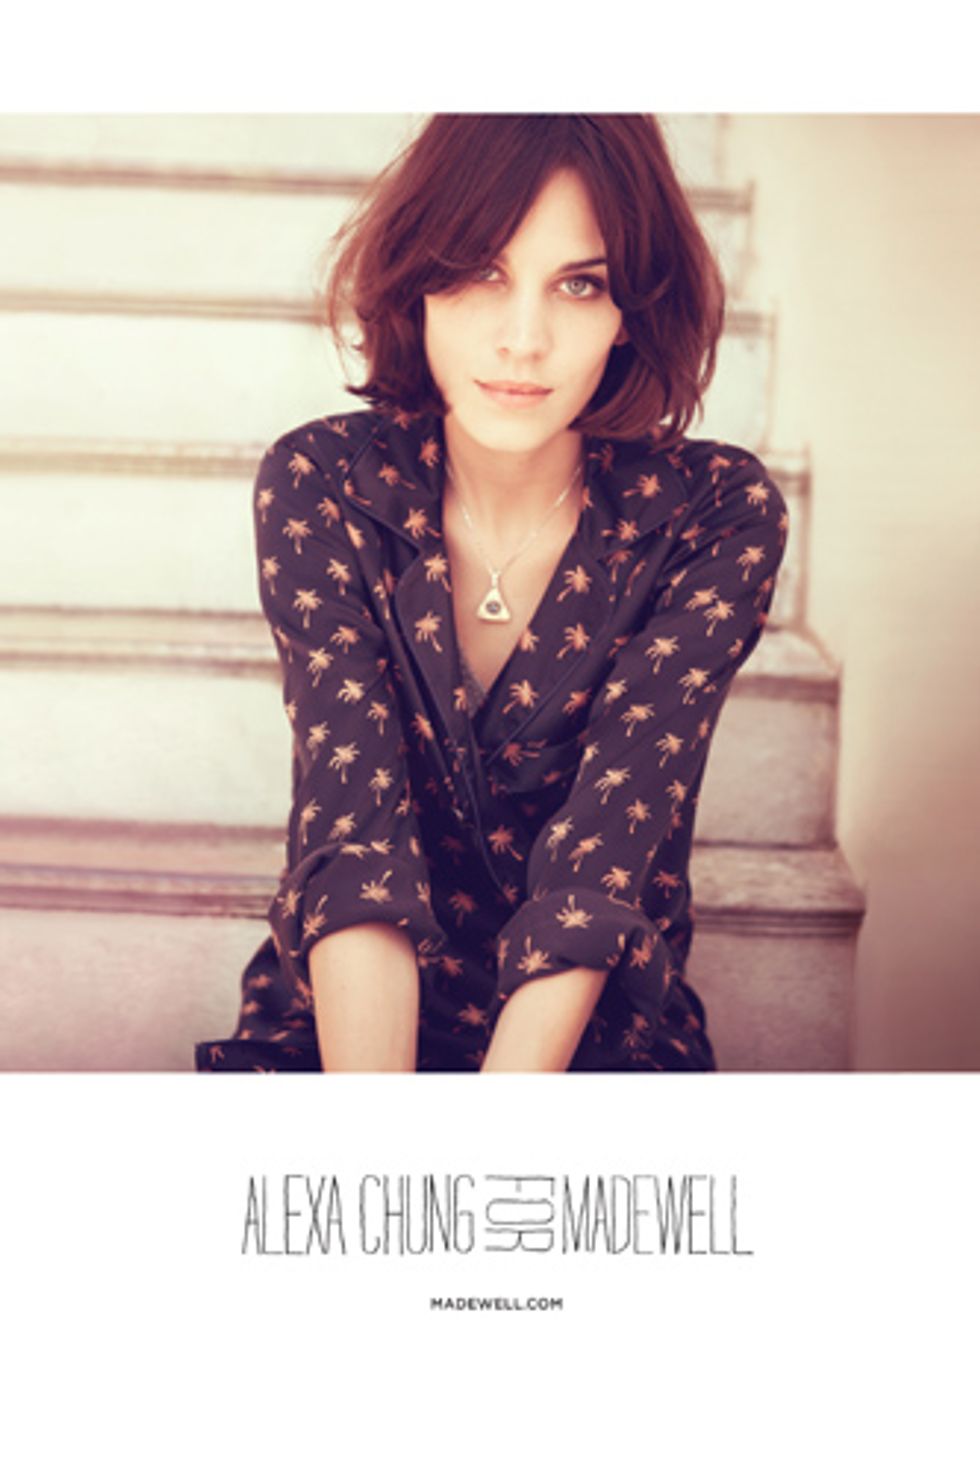 Alexa Chung Celebrates Her Second Madewell Collection With a Visit to San Francisco